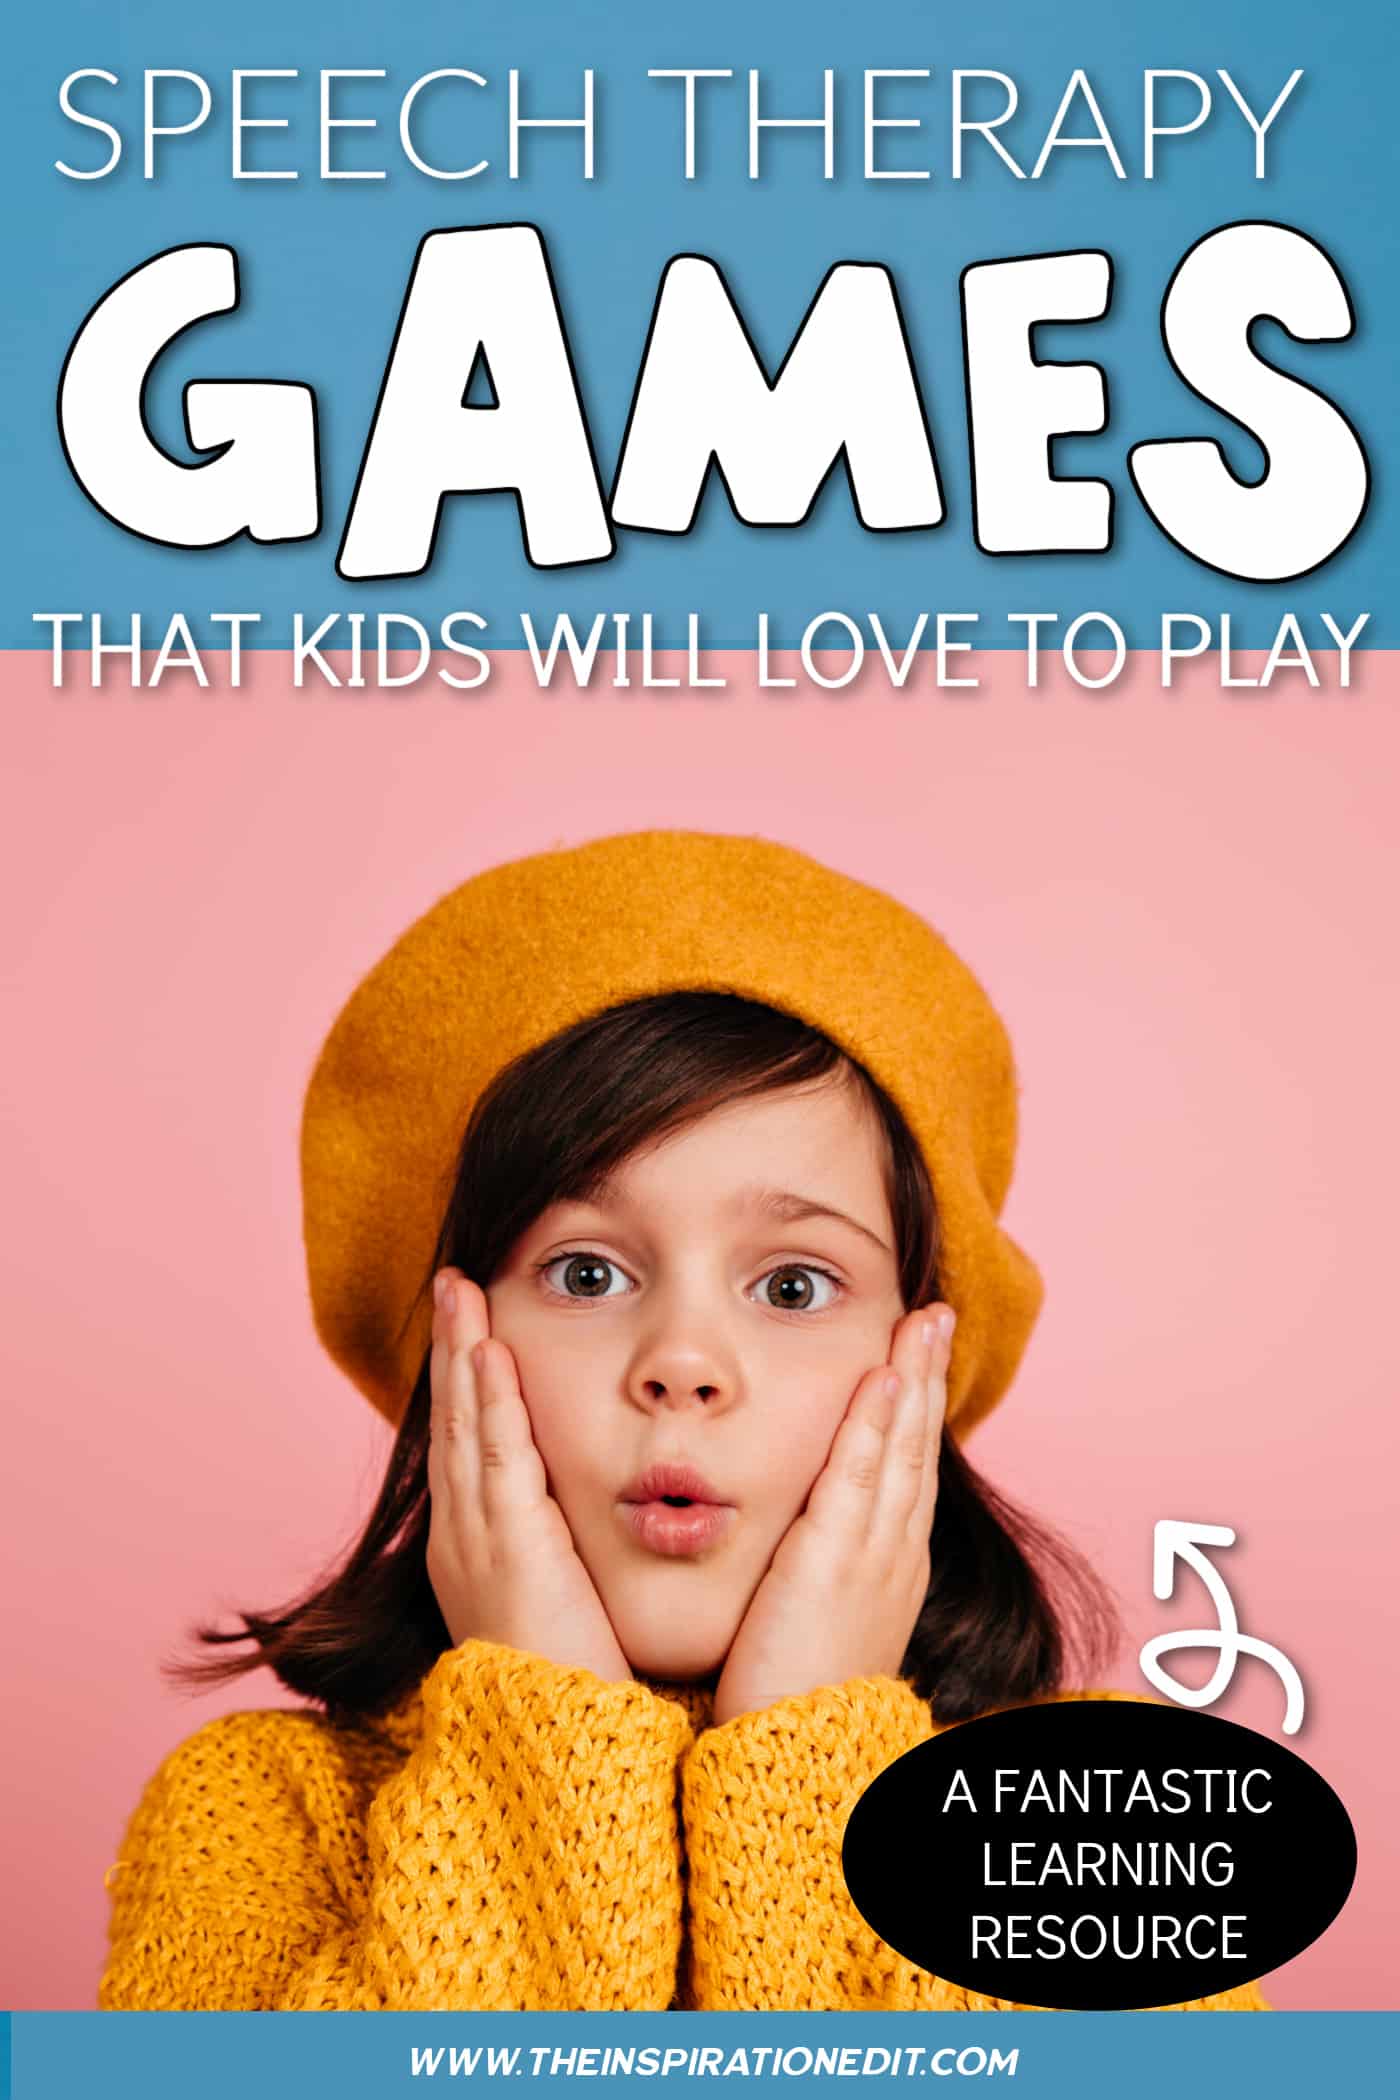 games for speech therapy online